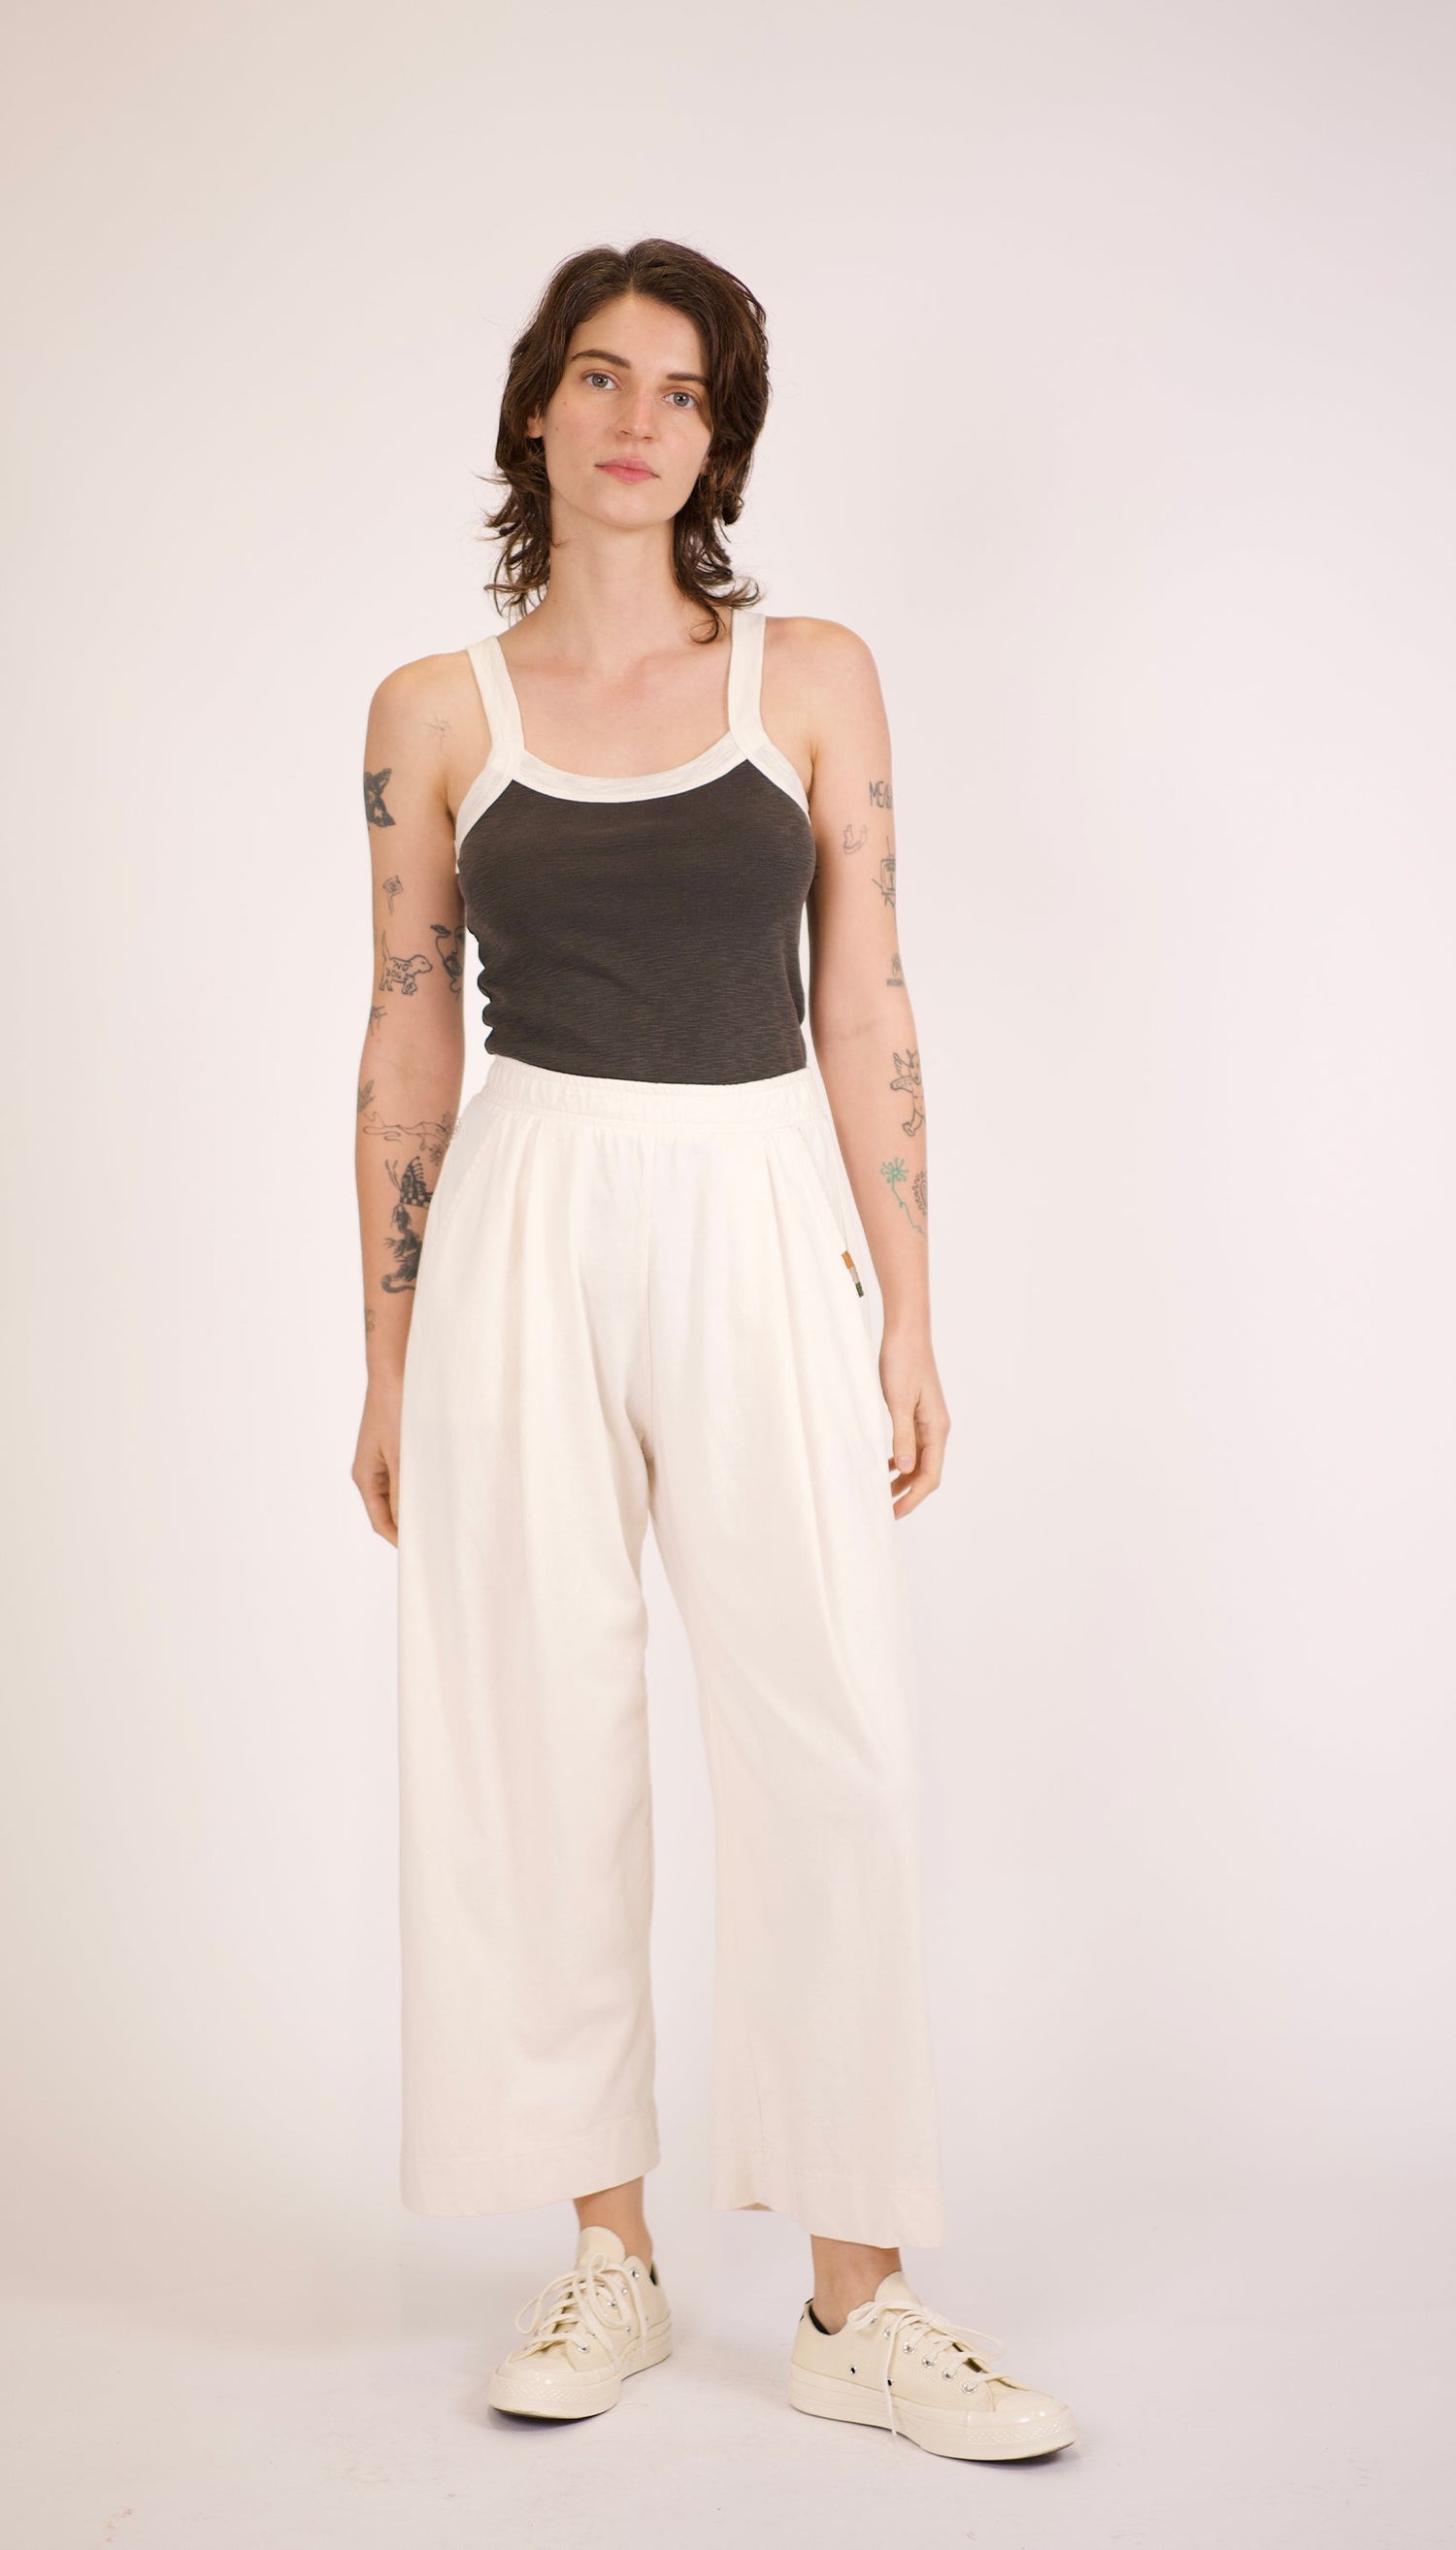 Slip-on wide-leg jersey slacks, elastic waistband, comfy yet chic! Made with 100% Organic Cotton Jersey.